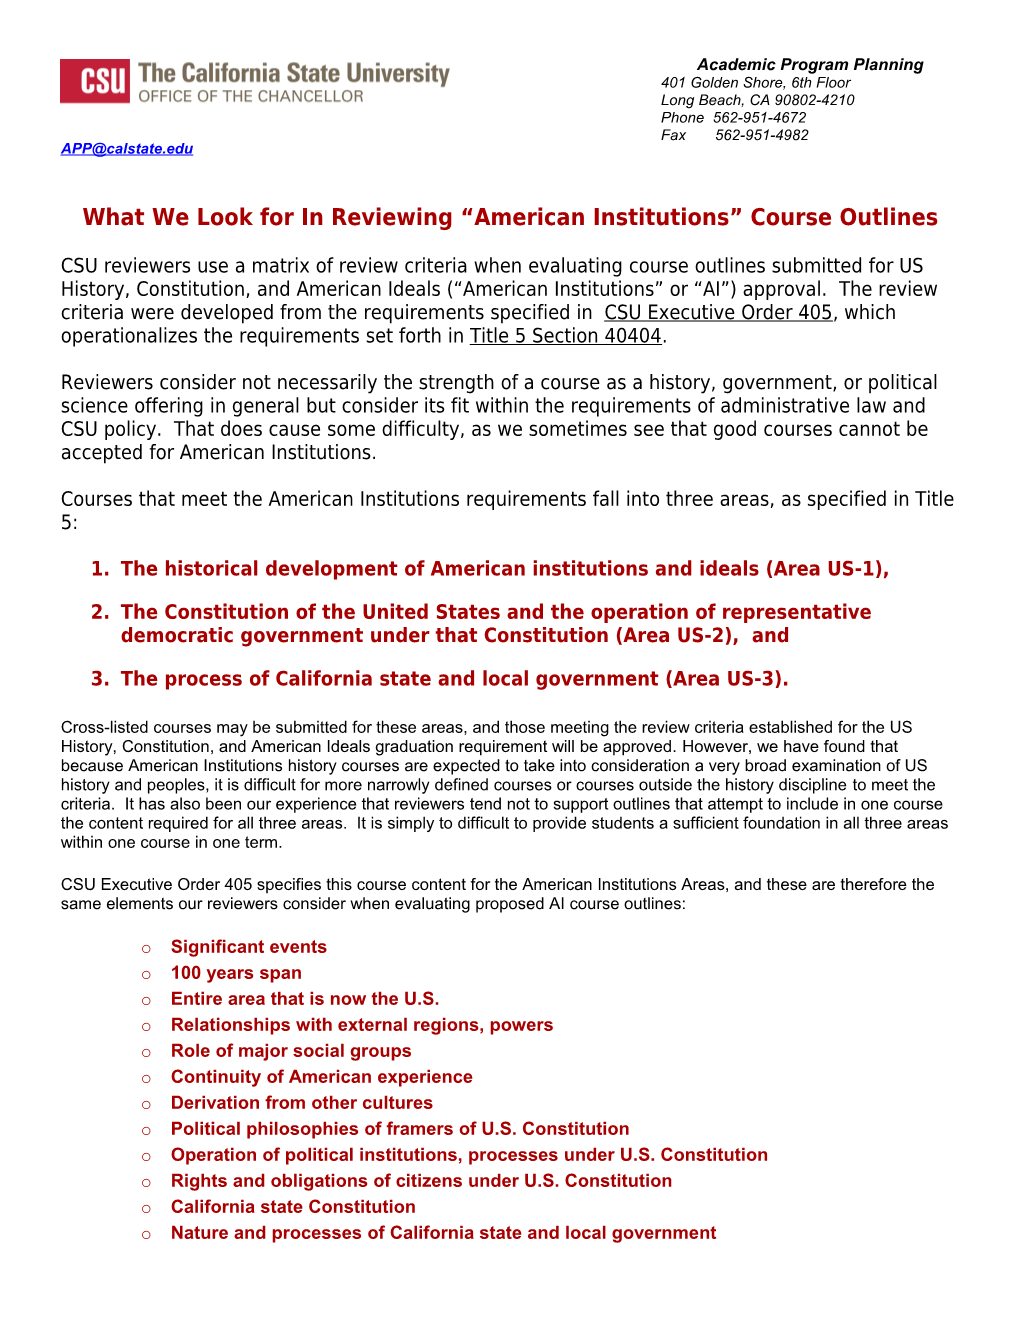 What We Look for in Reviewing American Institutions Course Outlines